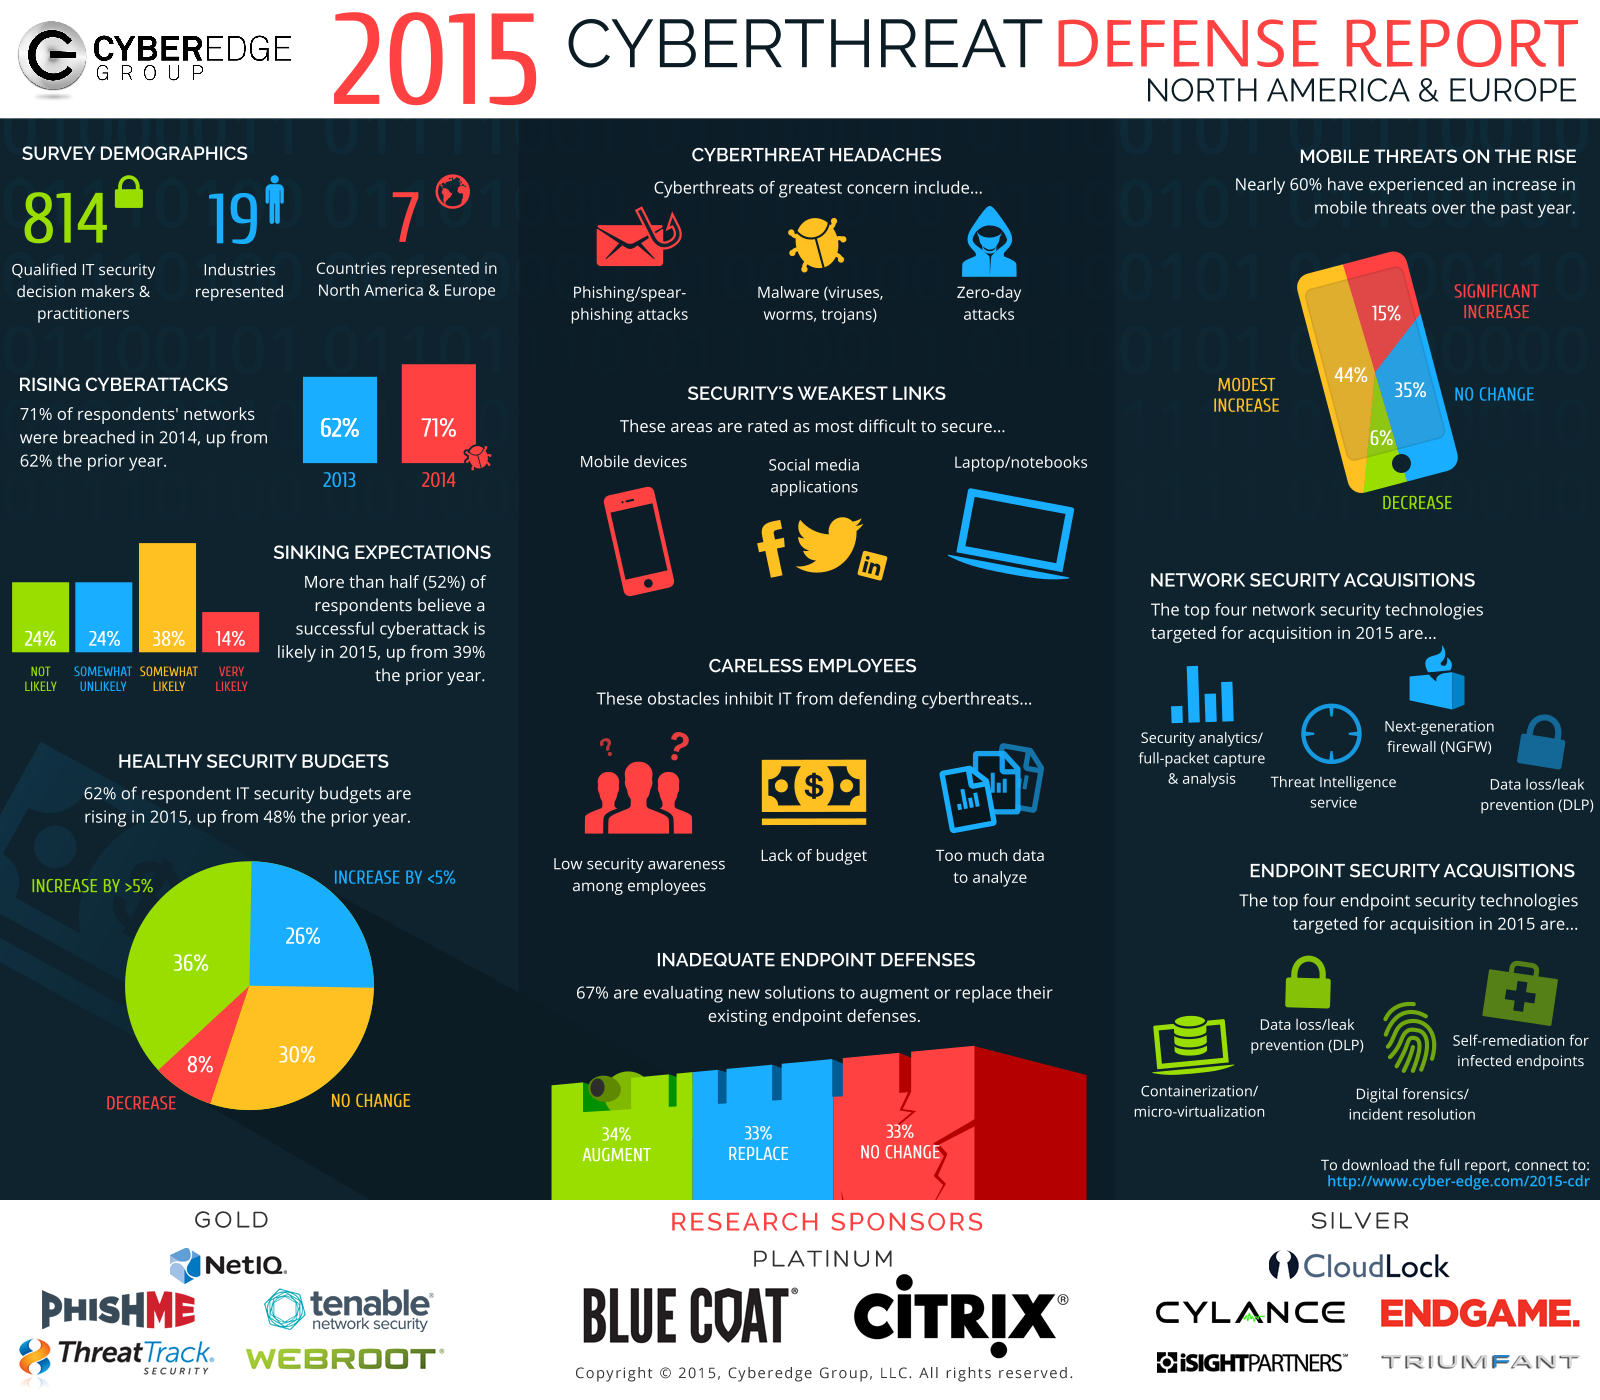 Presentation image for CyberEdge 2015 Cyberthreat Defense Report Infographic